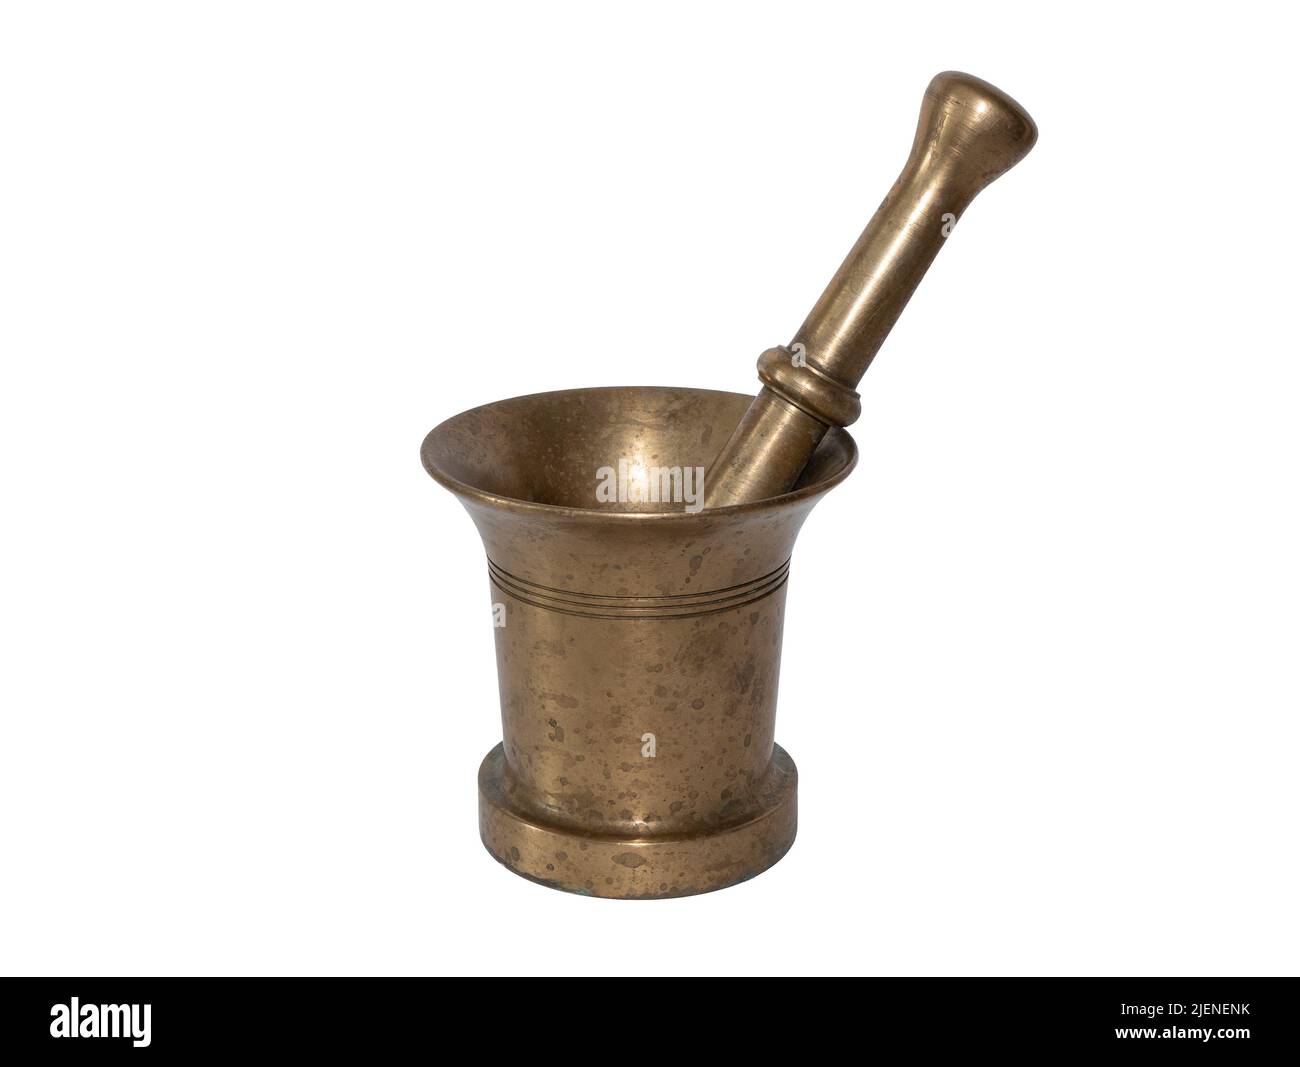 Brass mortar and pestle isolated on white background. Concept of alchemy, homeopathy, herbalism. Equipment for grinding and blending herbs and dried i Stock Photo